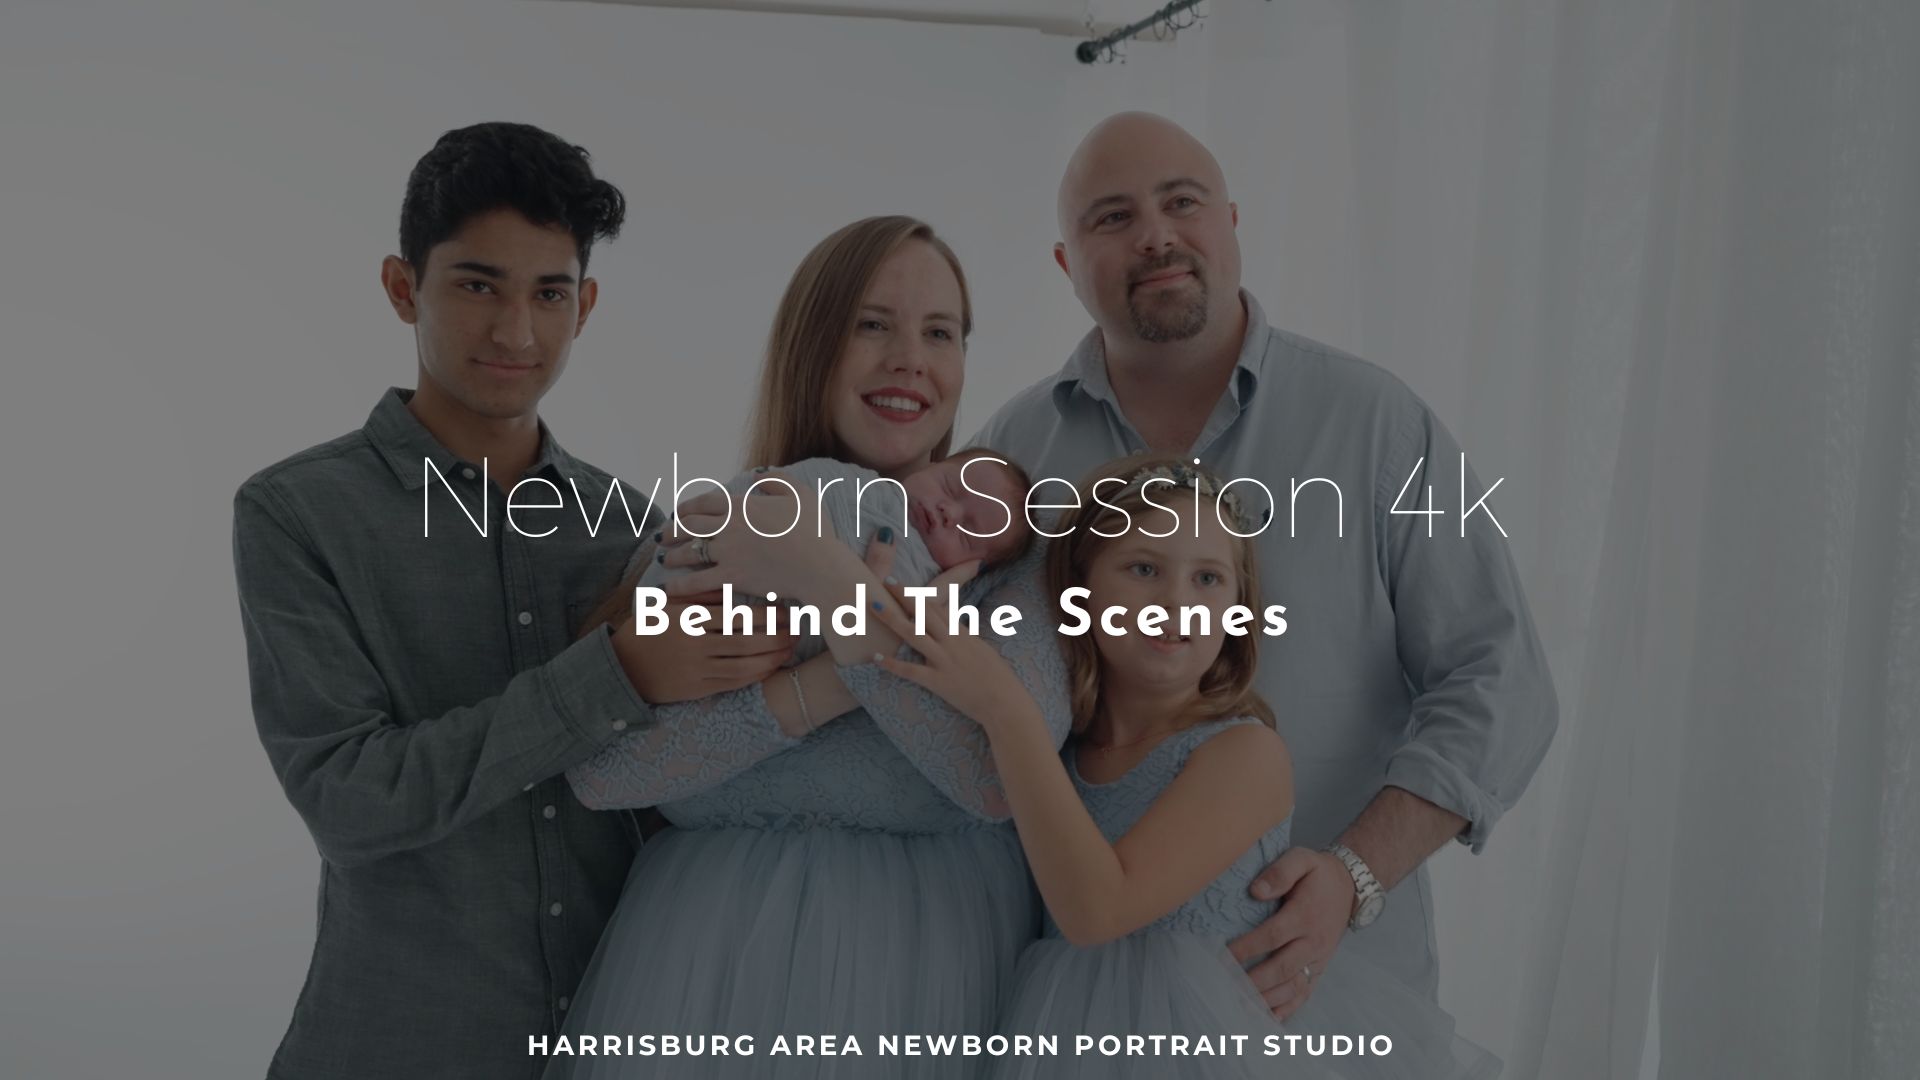 Newborn Session 4k Behind the Scenes featured image